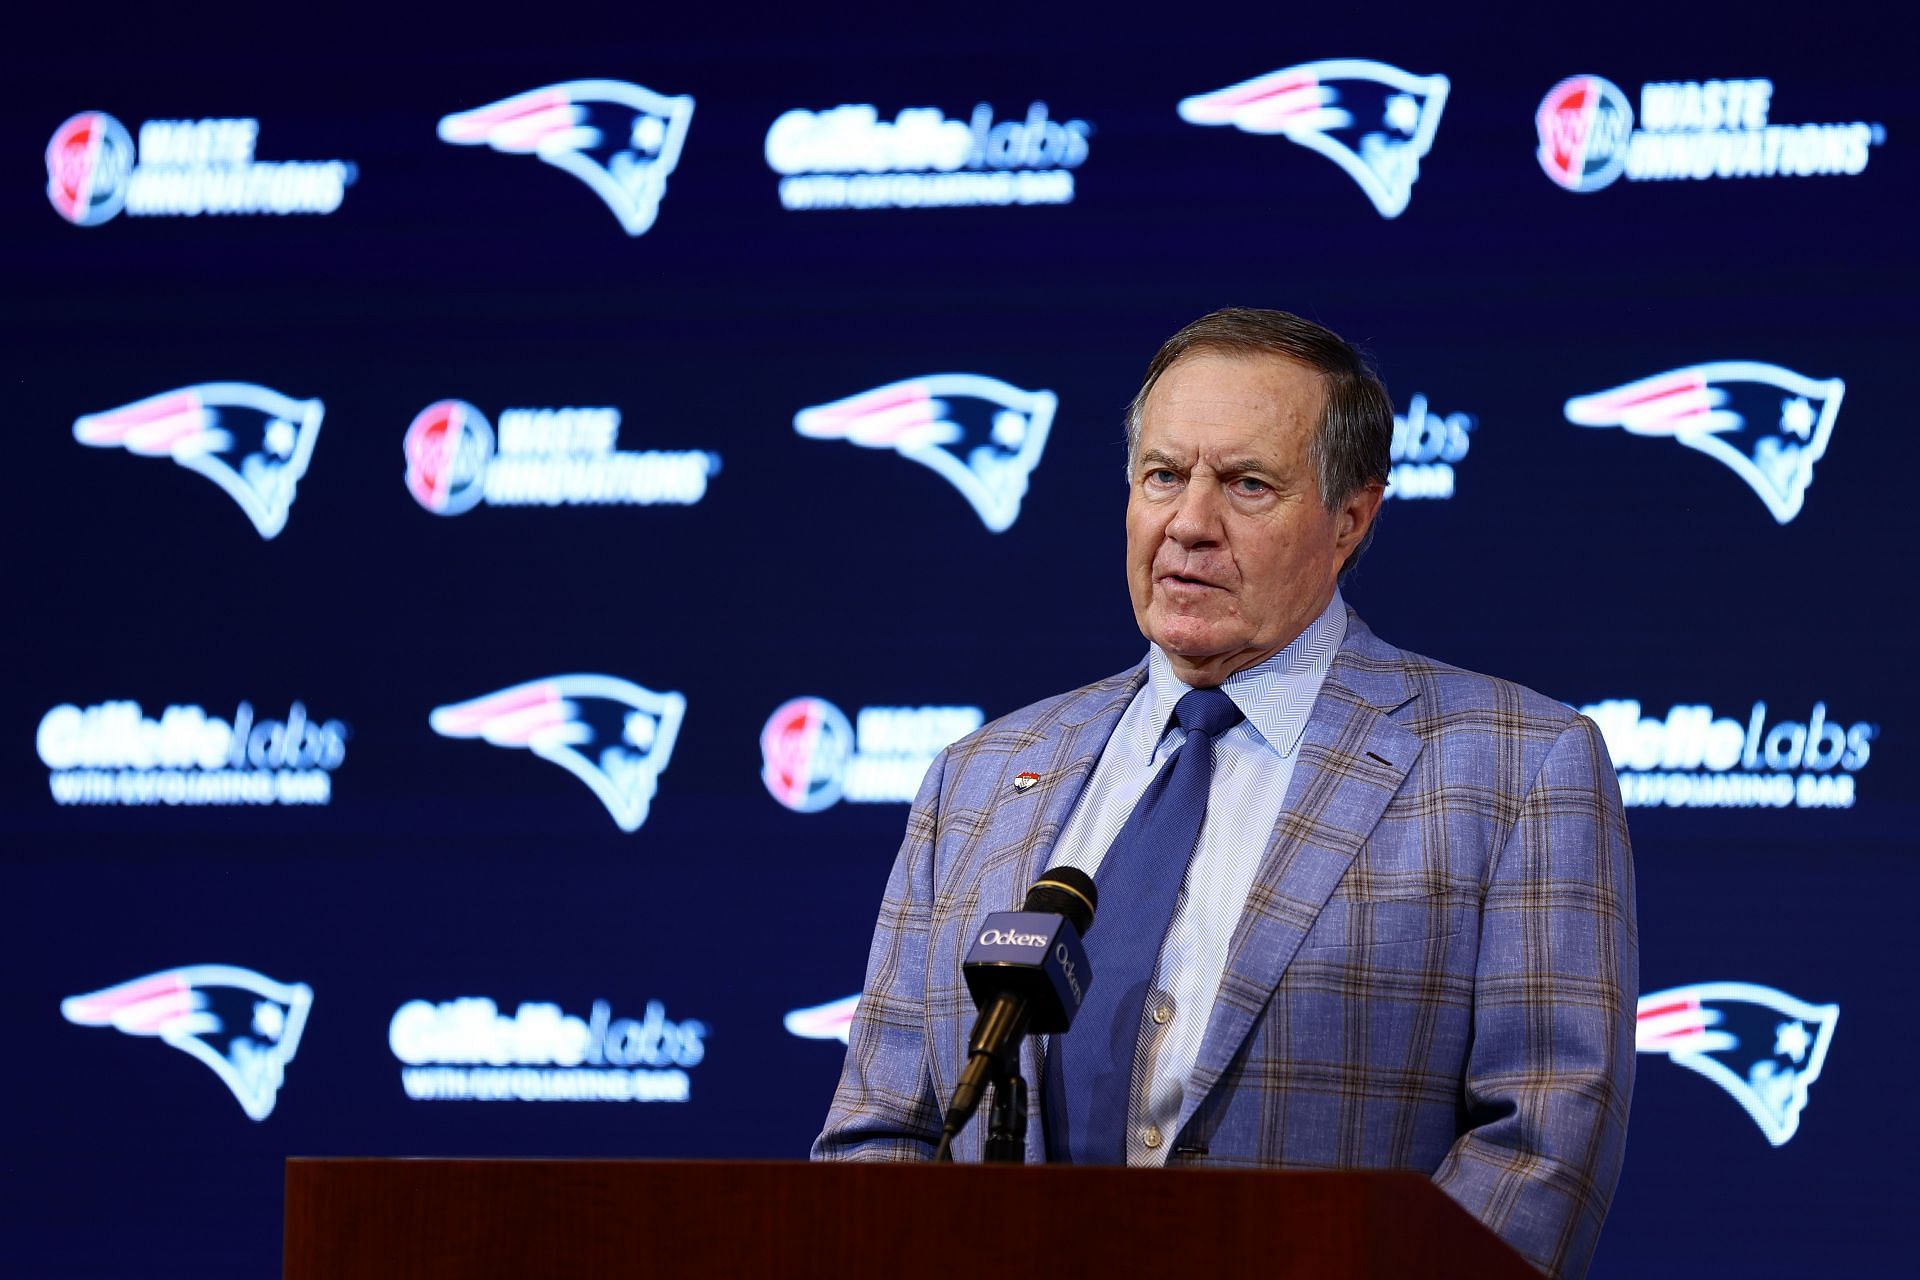 Bill Belichick during New England Patriots Press Conference